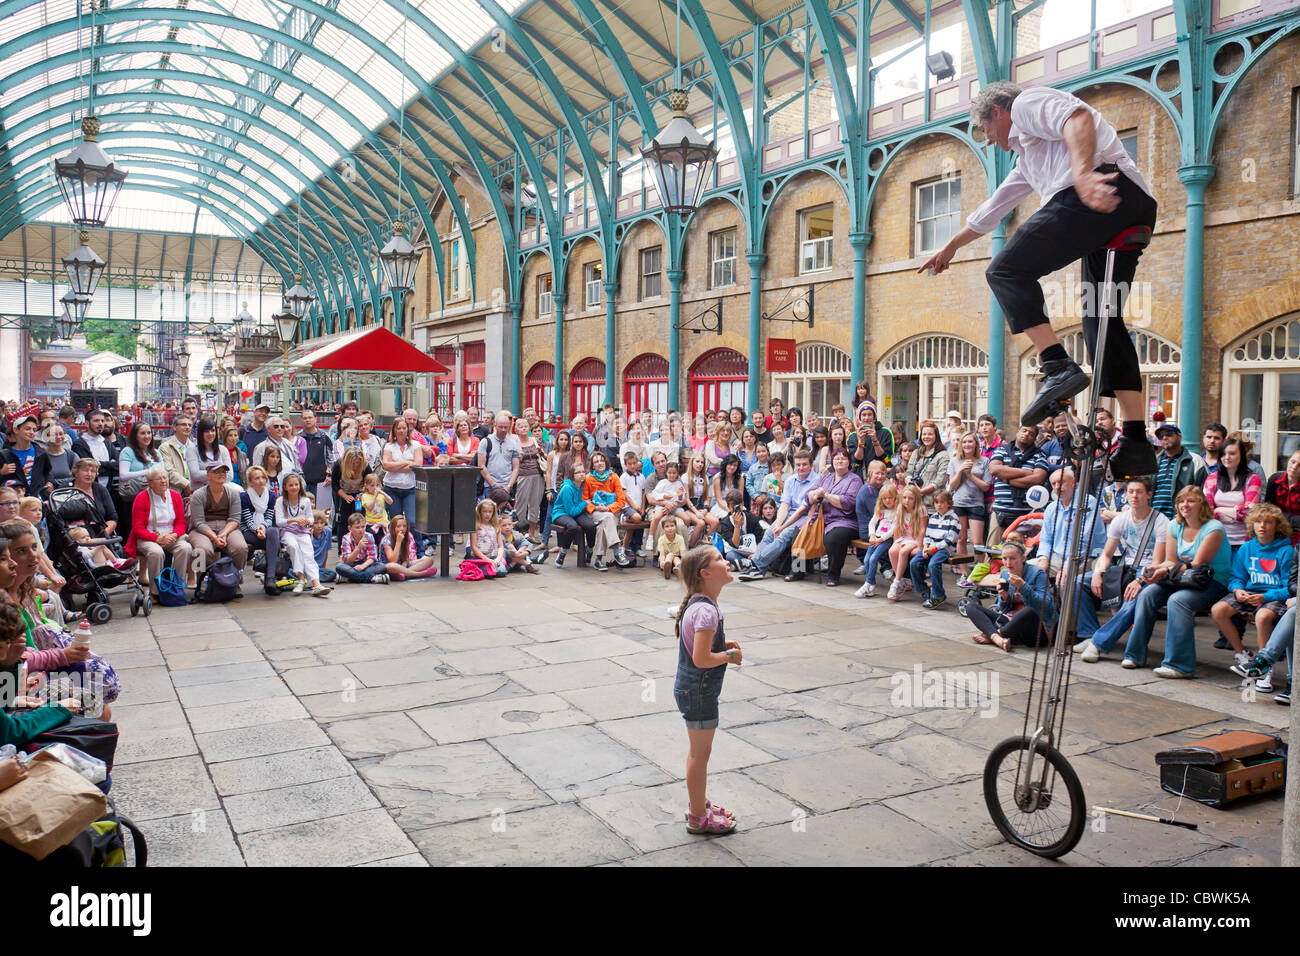 Tourists, shoppers and a street performer on a high bicycle with an audience at Covent Garden, London, England. Stock Photo